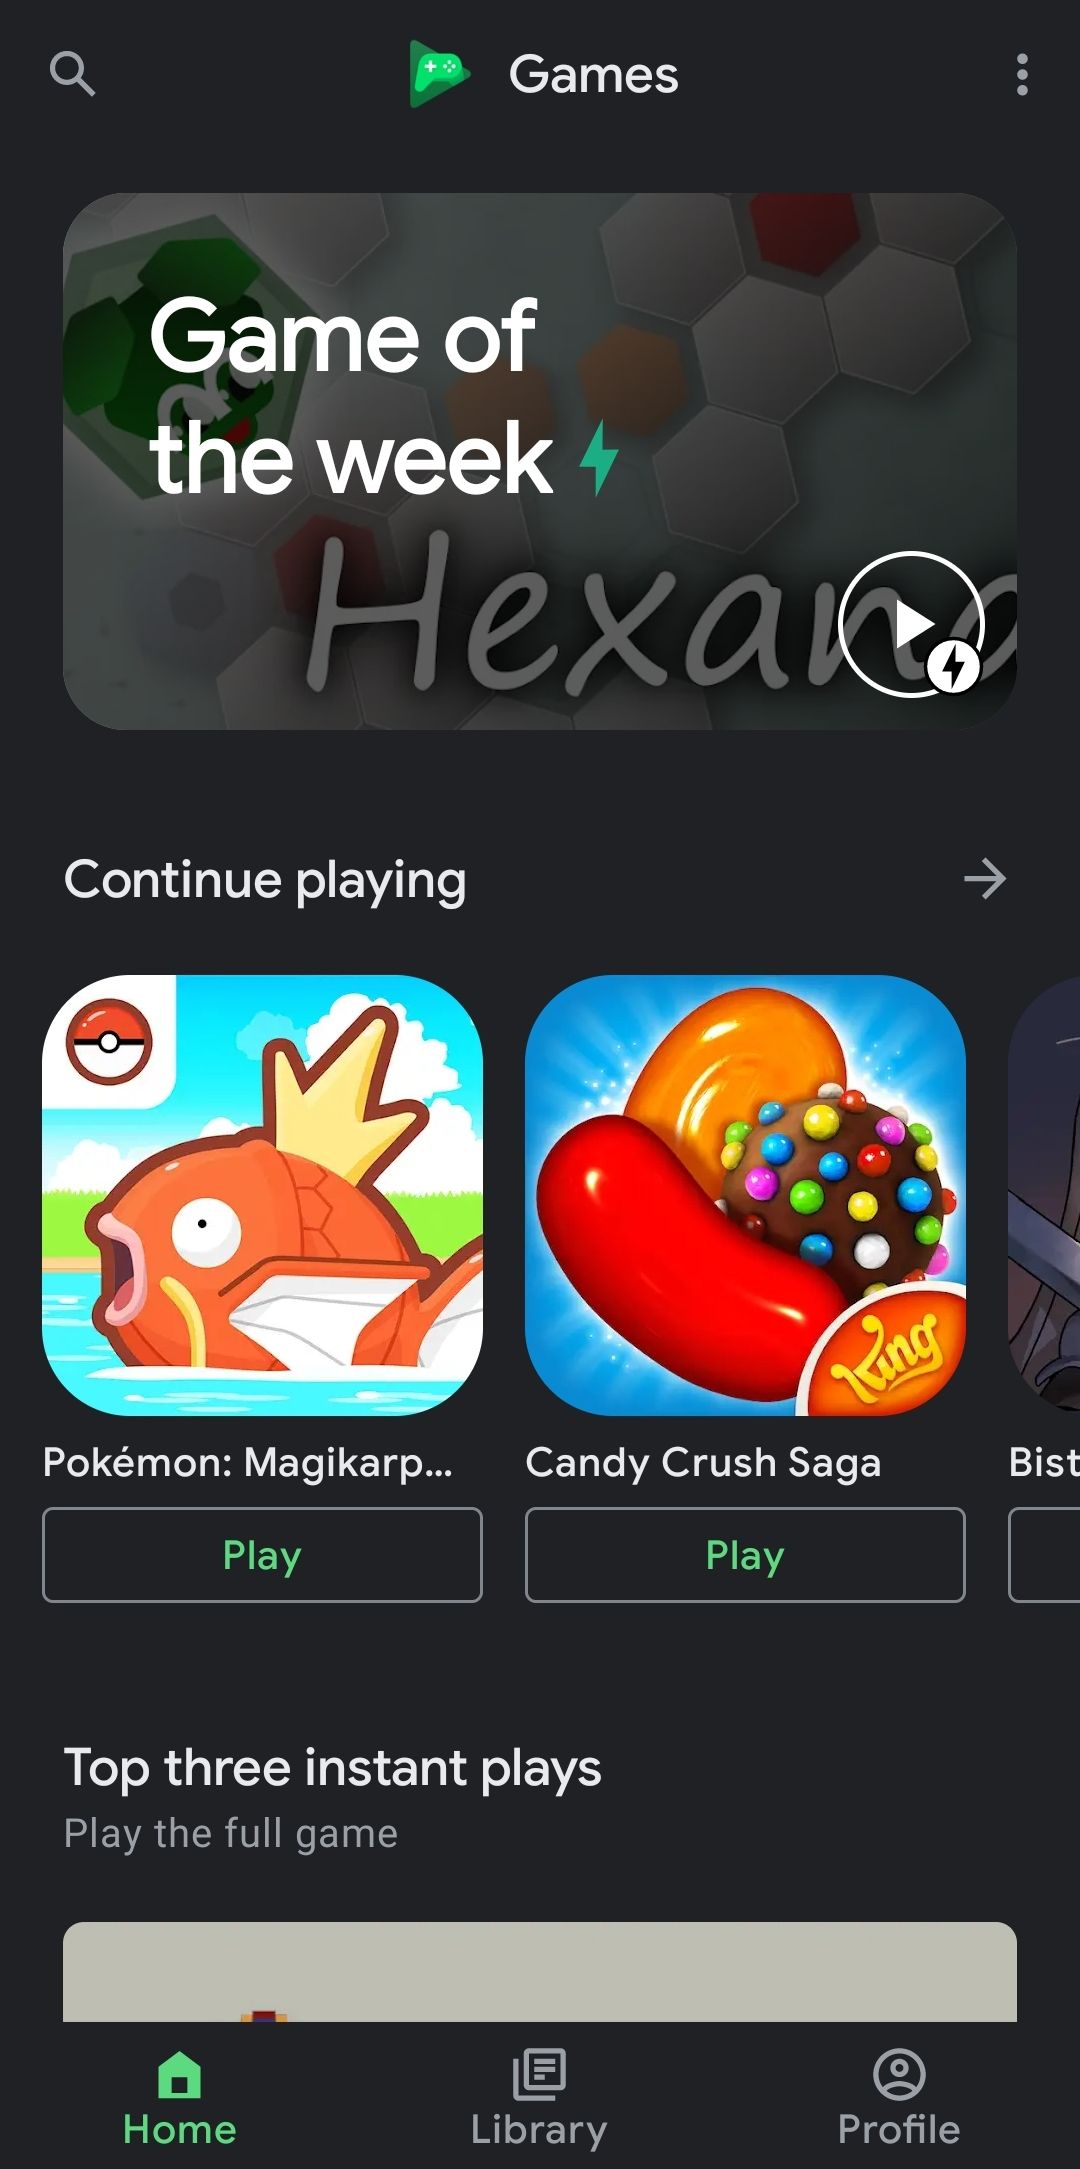 Google Play Games' home screen allocates only one line of the home page to your games - the rest is ad space